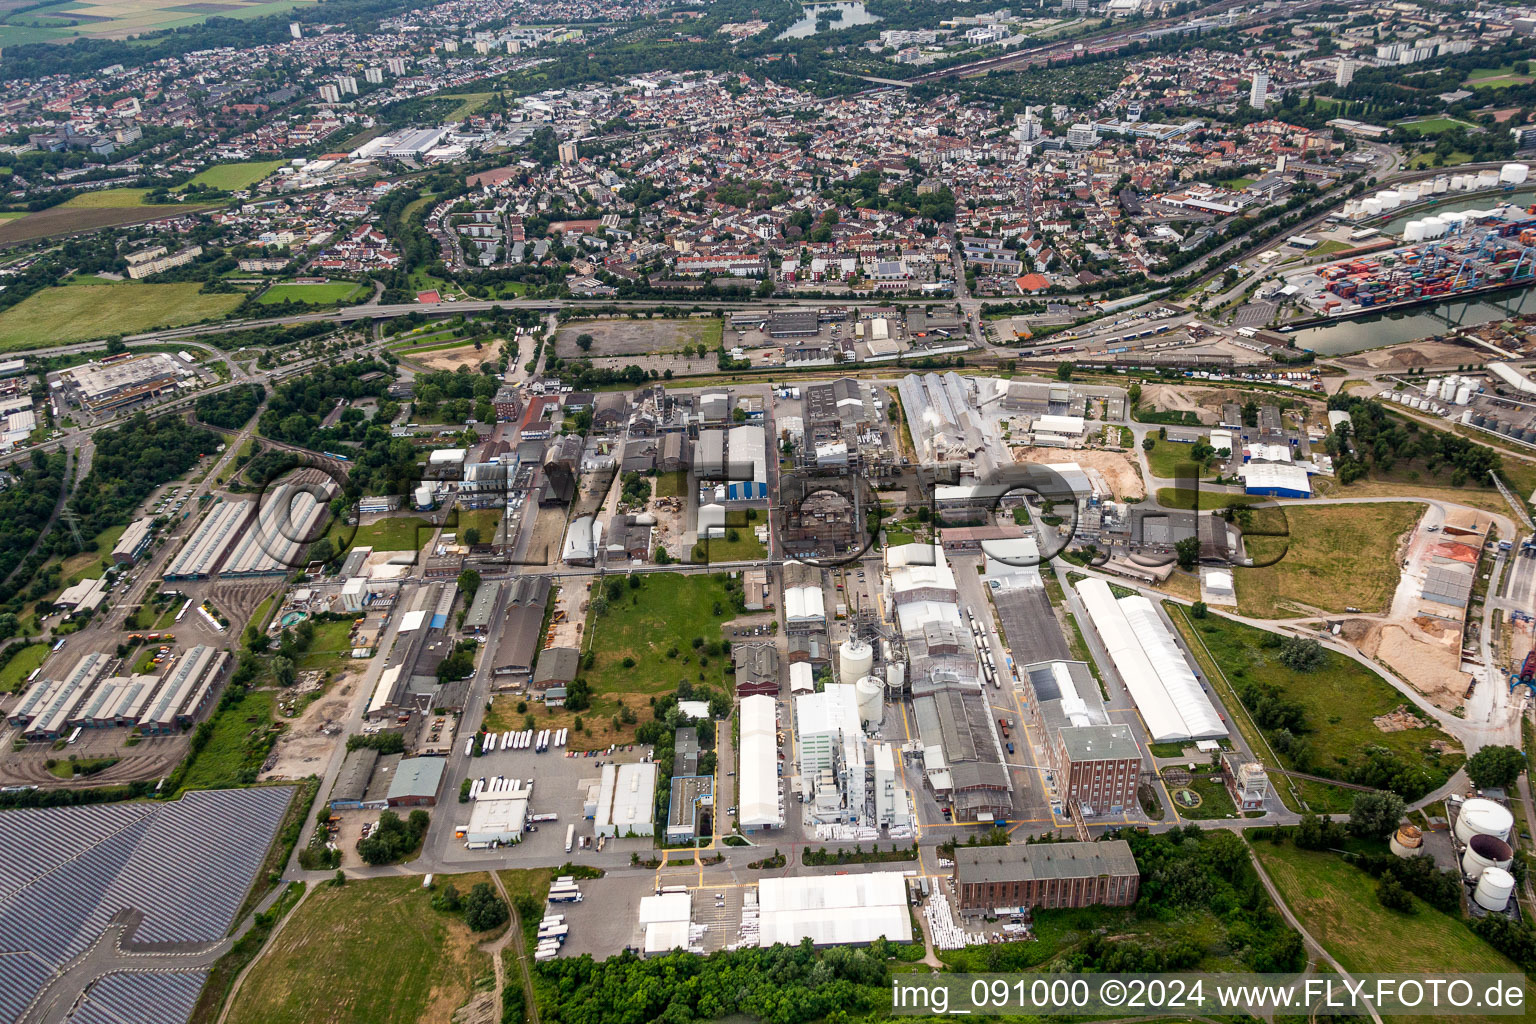 Technical facilities in the industrial area of ICL Germany Ludwigshafen / ICL Fertilizers Deutschland GmbH in Ludwigshafen am Rhein in the state Rhineland-Palatinate, Germany